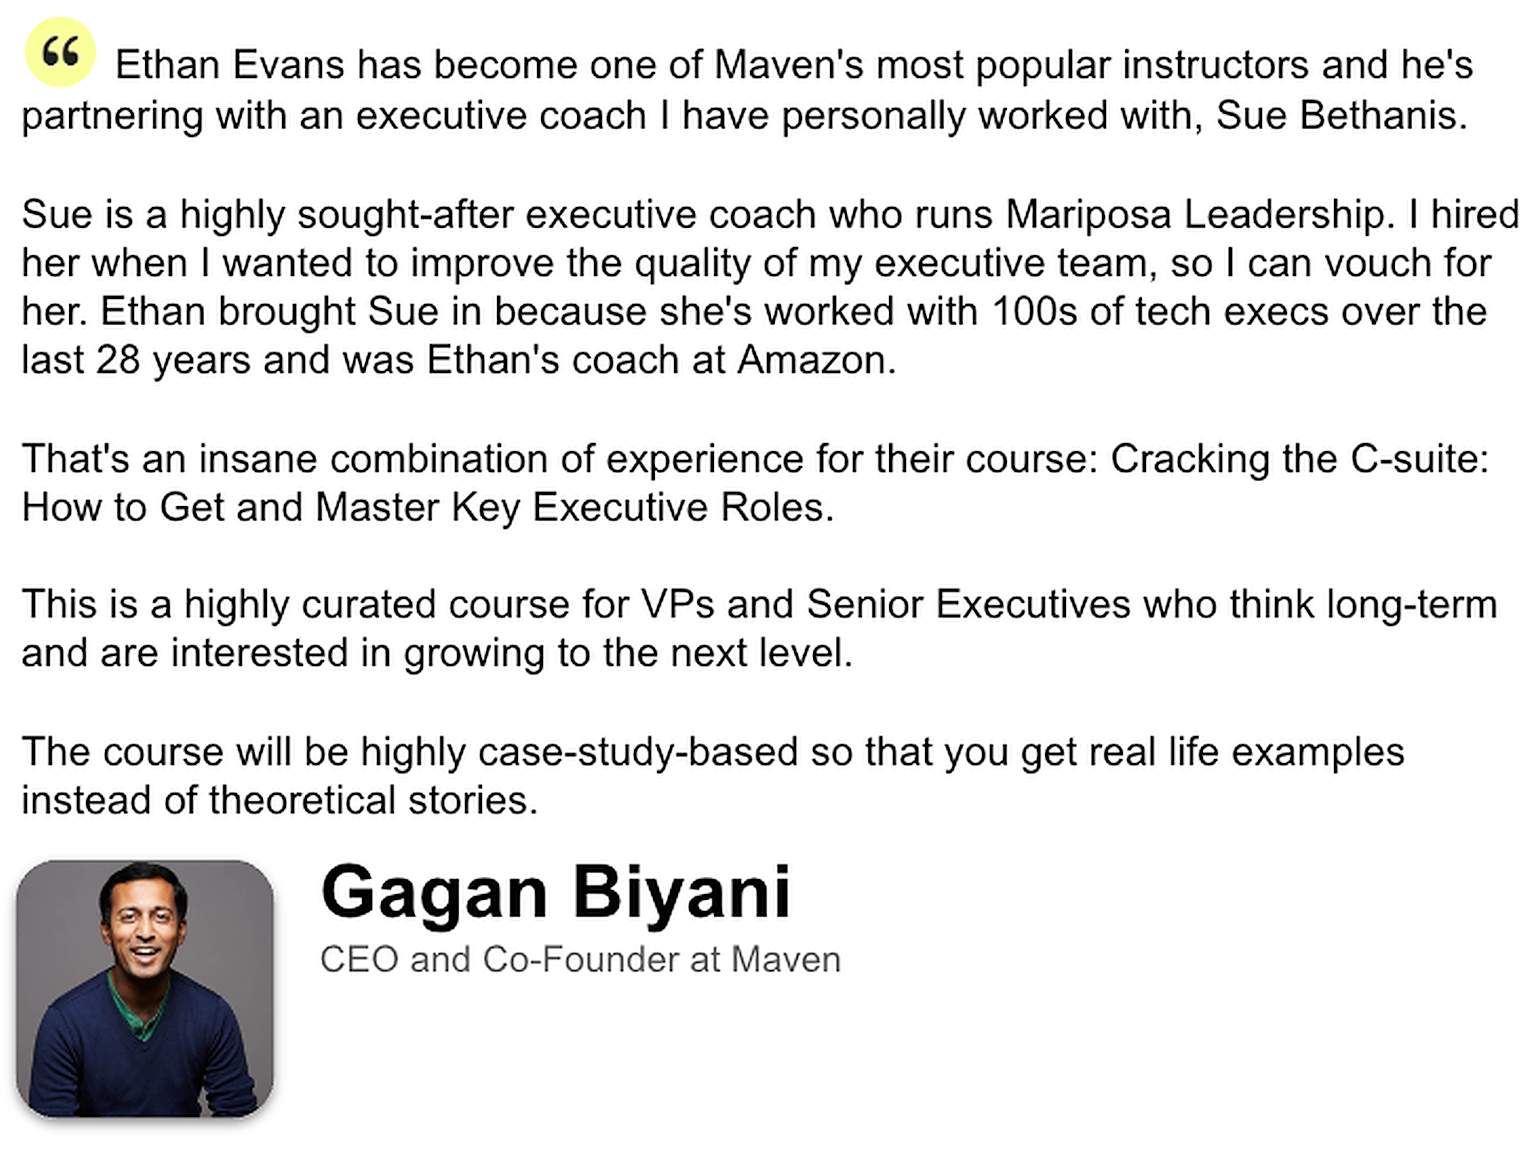 Read what Gagan Biyani, CEO and Co-Founder of Maven, said about the value of Ethan and Sue's course